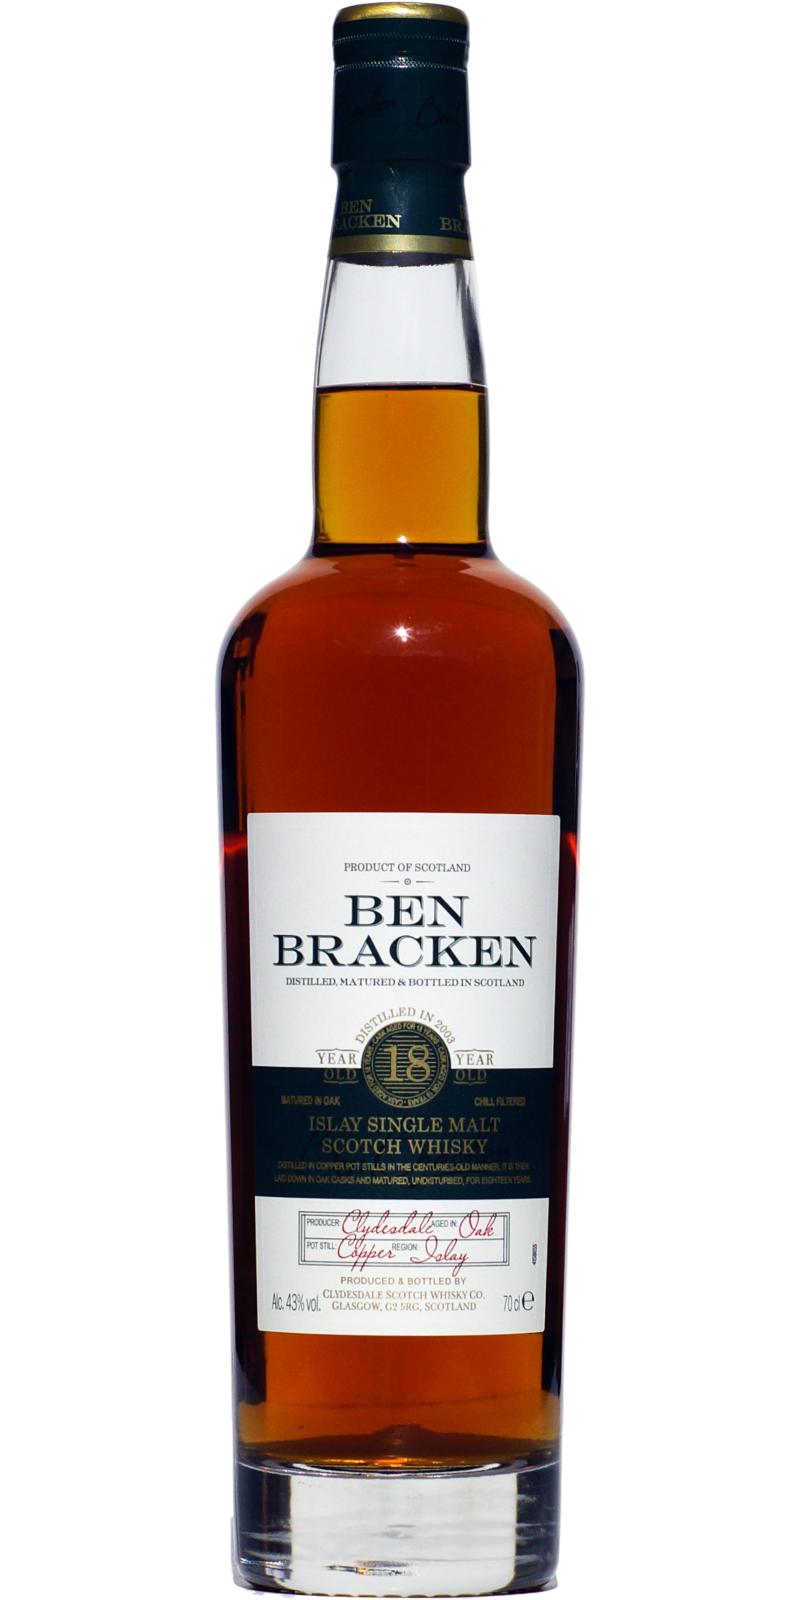 Ben Bracken 18-year-old Cd - Ratings and reviews - Whiskybase | Whisky